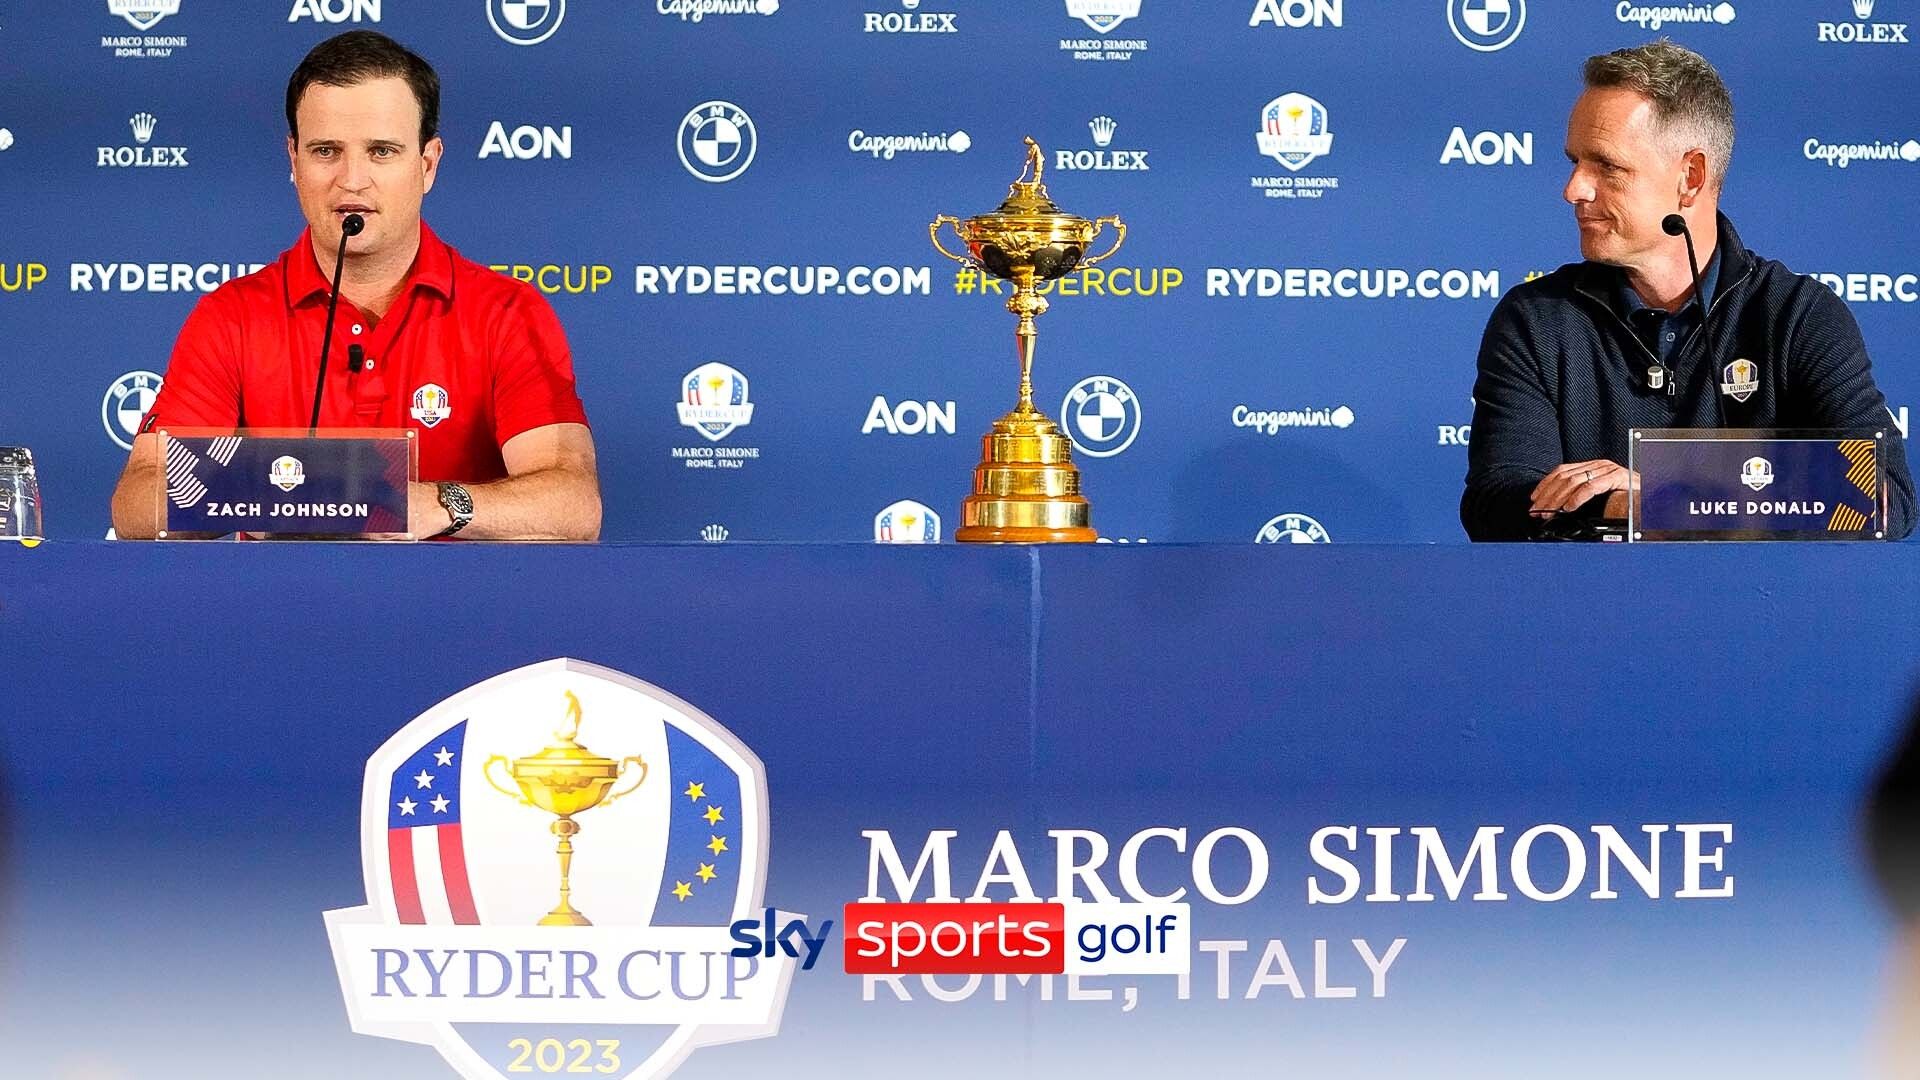 Ryder Cup captains Donald and Johnson clash over underdog status